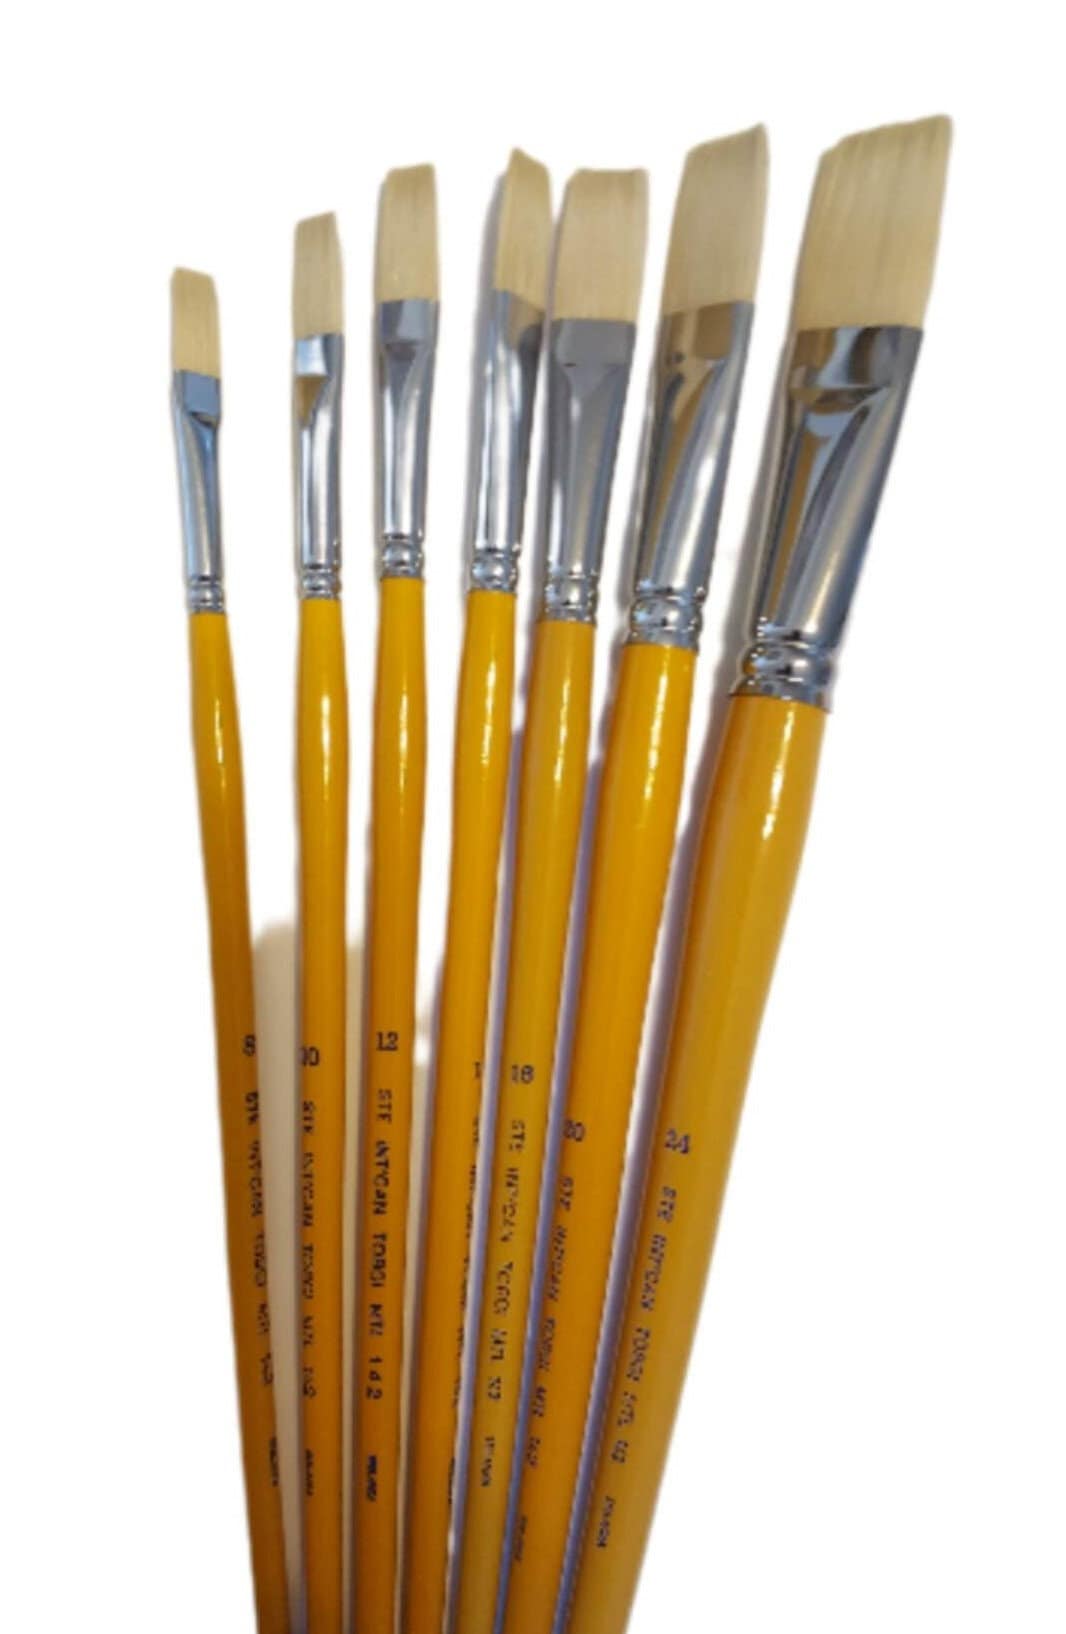 Artist Quality White Bristle Paint Brushes Oil & Acrylic Please Choose Your  Size 